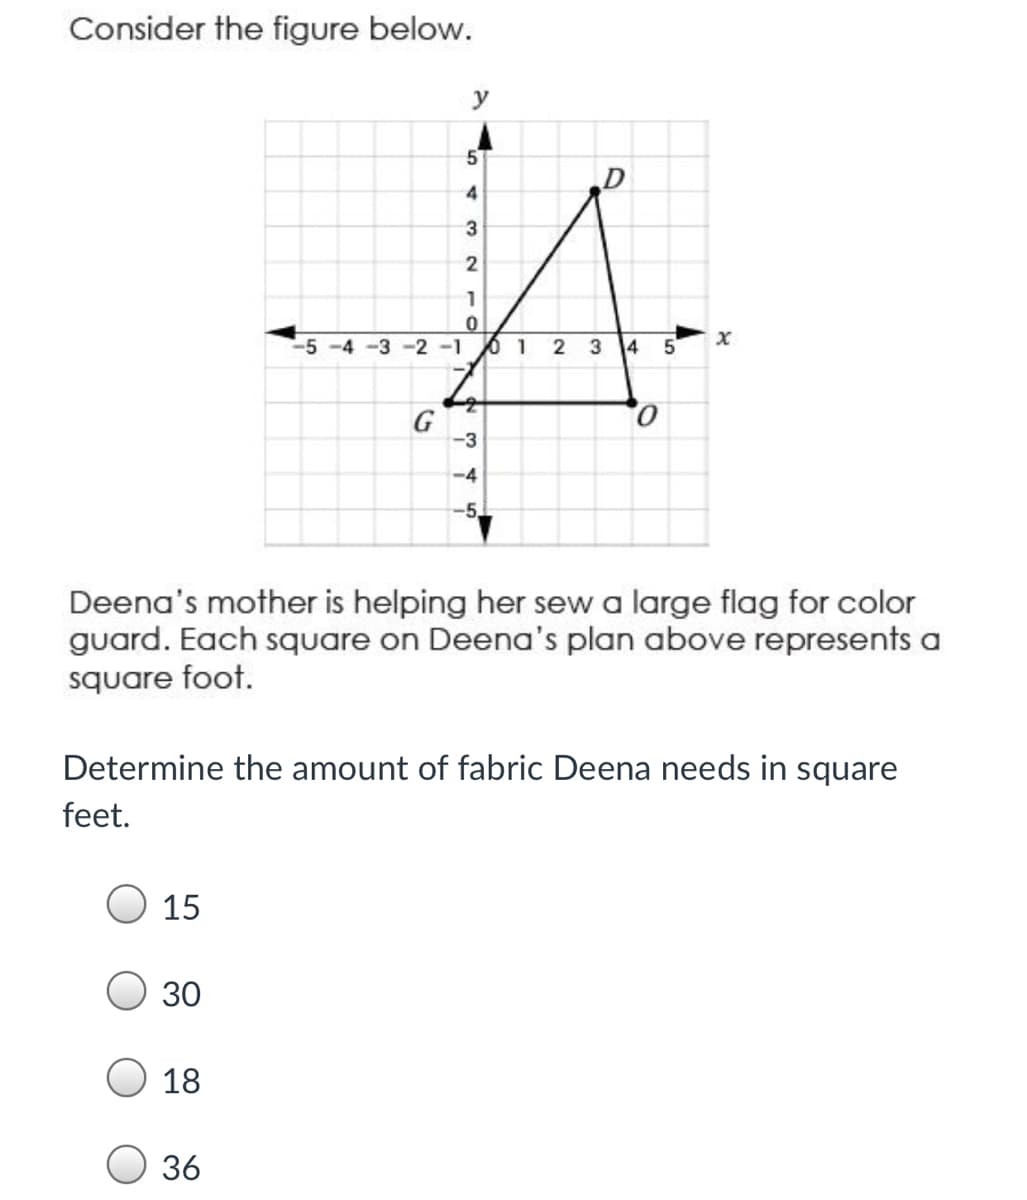 Consider the figure below.
y
4
3
2
1
-5 -4 -3 -2 -1
61 2 3
14
G
-3
-4
-5
Deena's mother is helping her sew a large flag for color
guard. Each square on Deena's plan above represents a
square foot.
Determine the amount of fabric Deena needs in square
feet.
15
30
18
36
